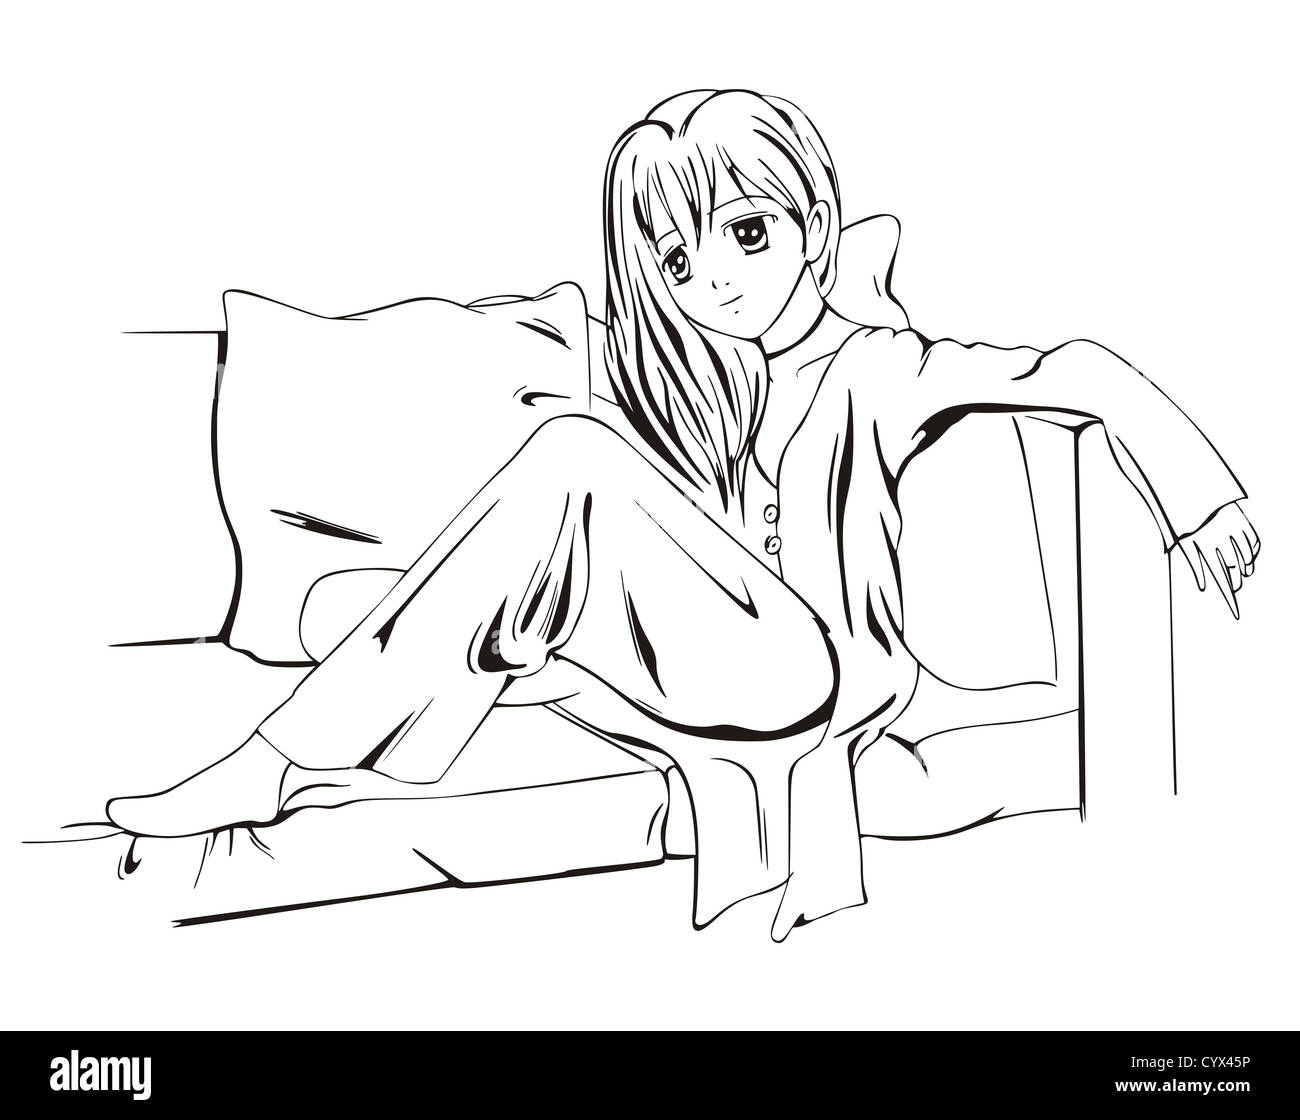 Anime girl sitting on sofa with pillows. Black and white vector  illustration Stock Photo - Alamy